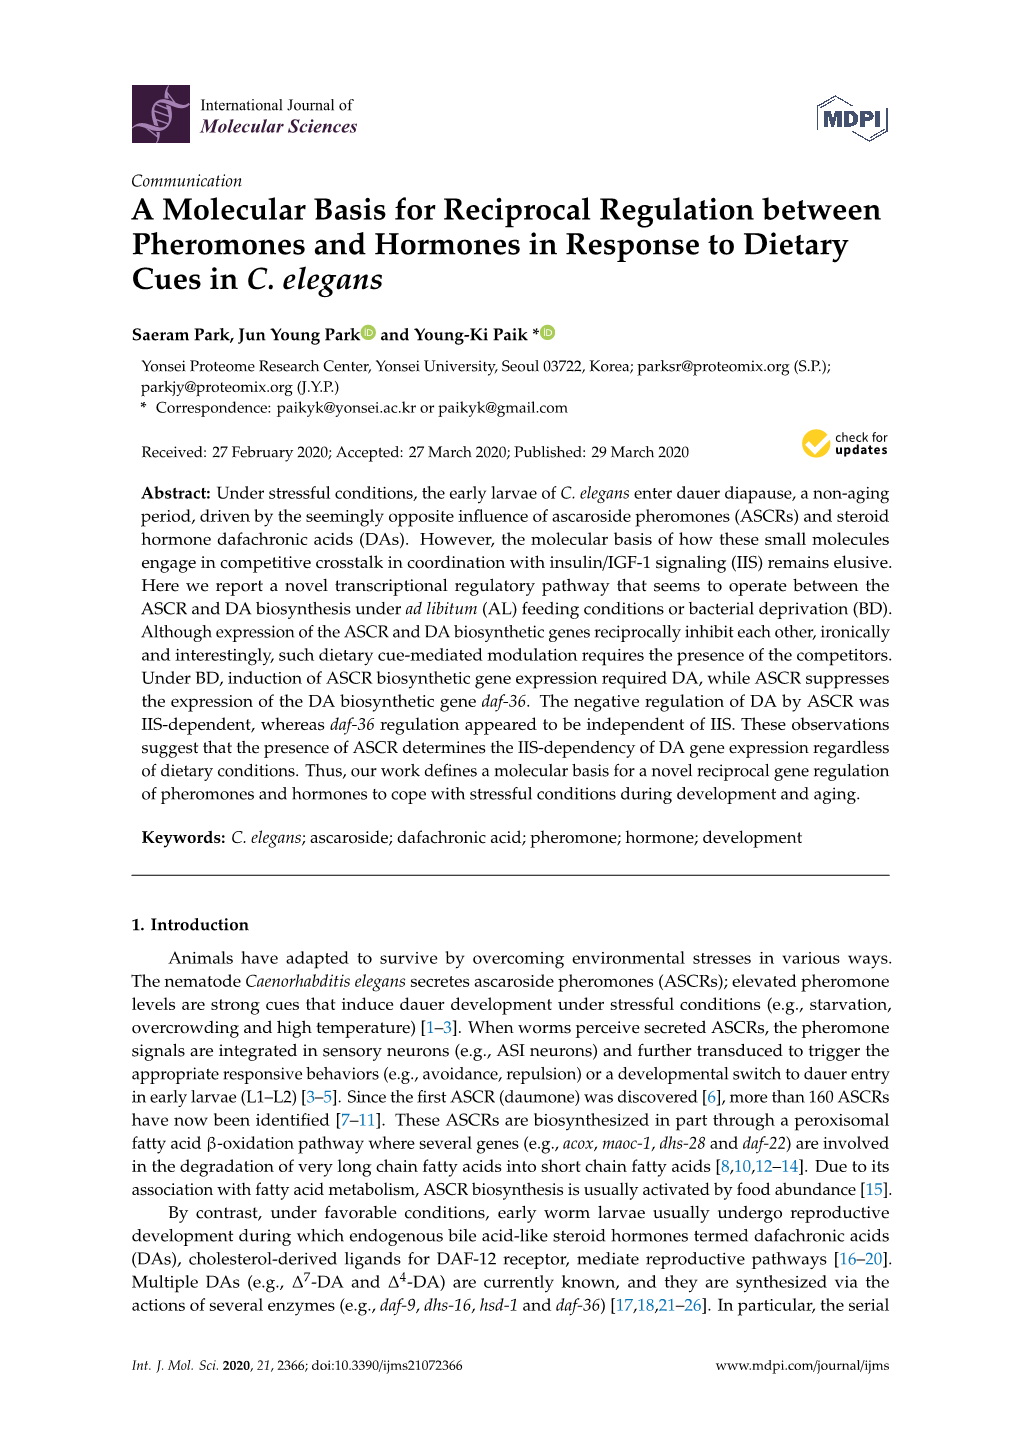 A Molecular Basis for Reciprocal Regulation Between Pheromones and Hormones in Response to Dietary Cues in C